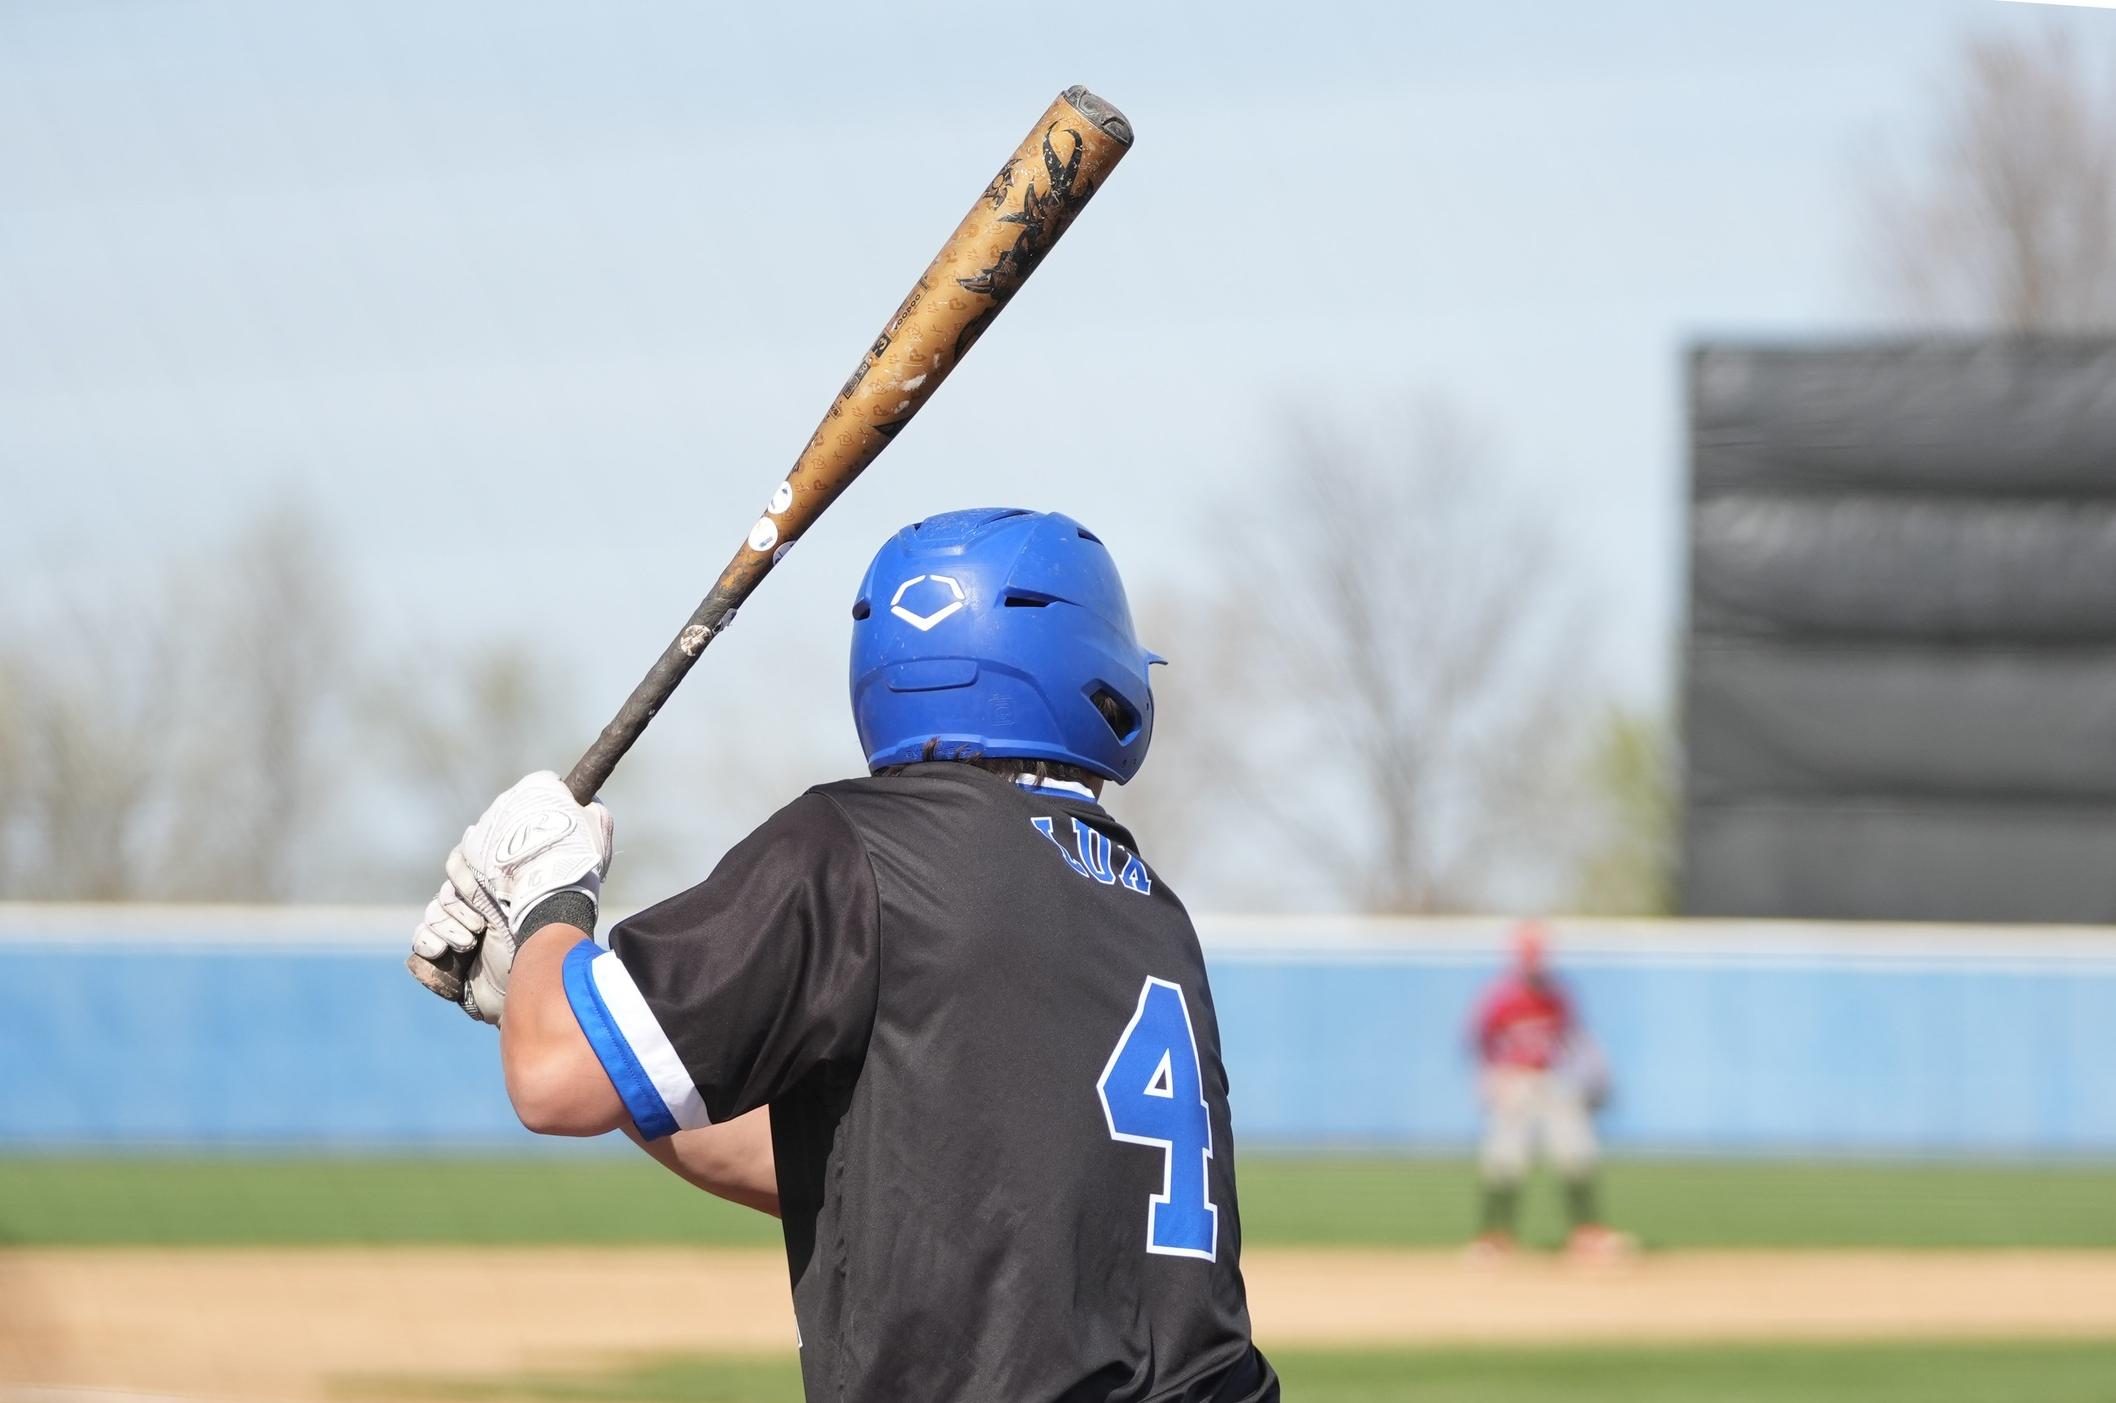 LUX HELPS EAGLES SPLIT WITH NIACC